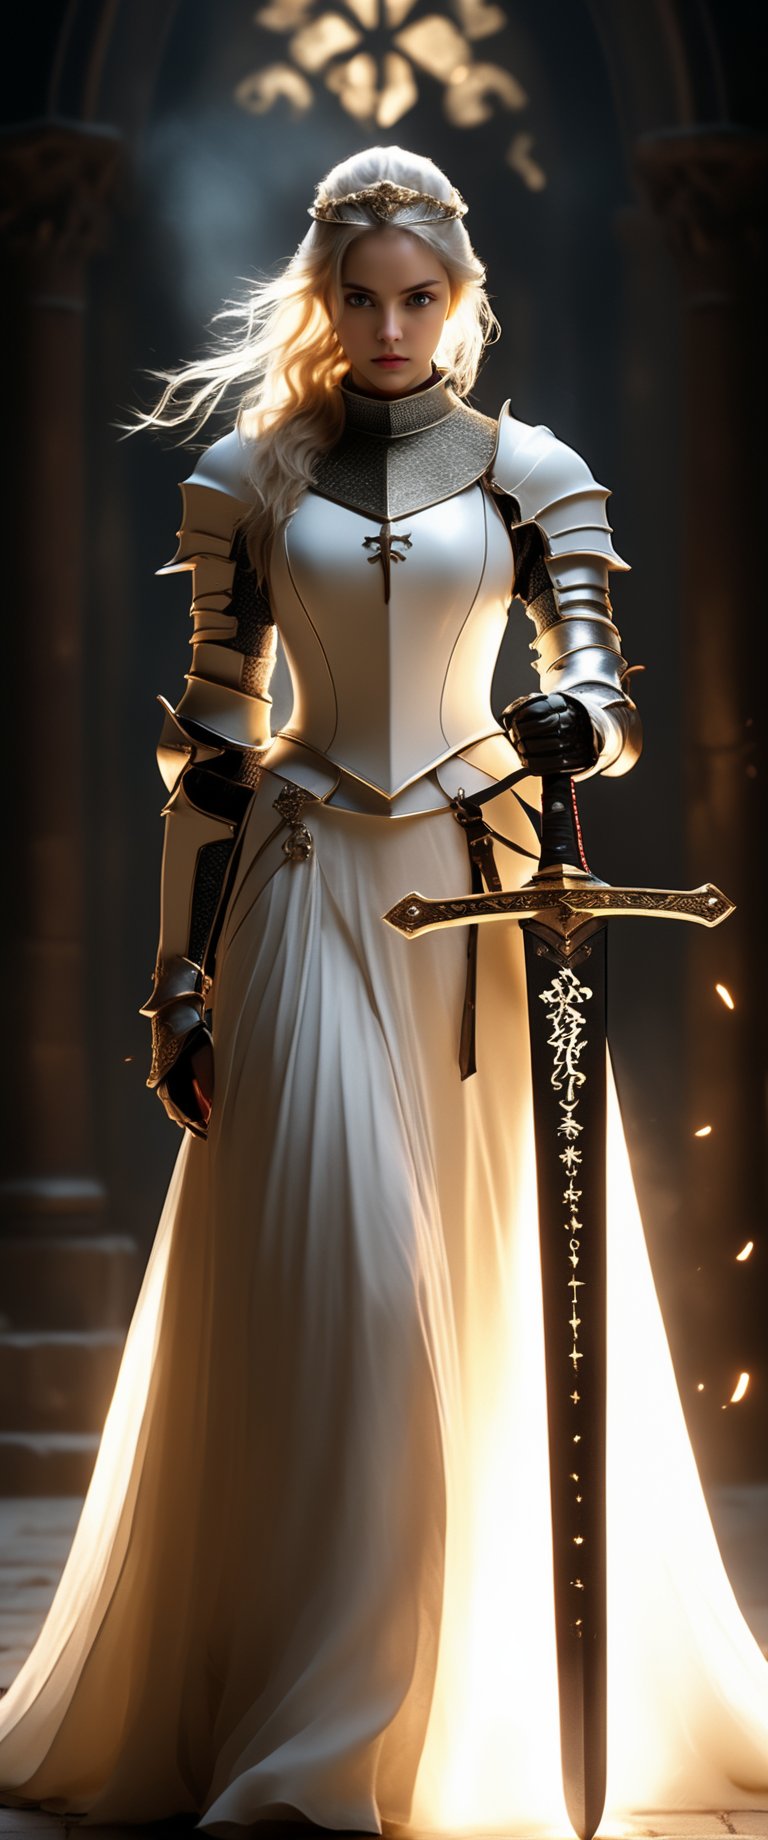 Full body. A girl wearing black armor in the ornate gothic style, pauldron, metallic collar, knight armor, golden filigree, holding sword, white glowing sword, flaming sword, battle_stance. A 17-years-old ethereal breathtakingly glamorous japanese girl, white hair, hairband, slim and tall perfect model body, An ethereal beautiful face with v-shaped jawline, bright eyes, almond-shaped eyes, translucent skin texture, porcelain skin tone. Adorned with christian symbols accentuating her high status as an inquisitor. The best warrior of inquisition. award-winning, hyperrealistic:1.2, realistic, raw photo, warrior, photo_b00ster, glowing sword, ct-fujiii, ct-eujiiin,Movie Still,Cinematic ,more detail XL